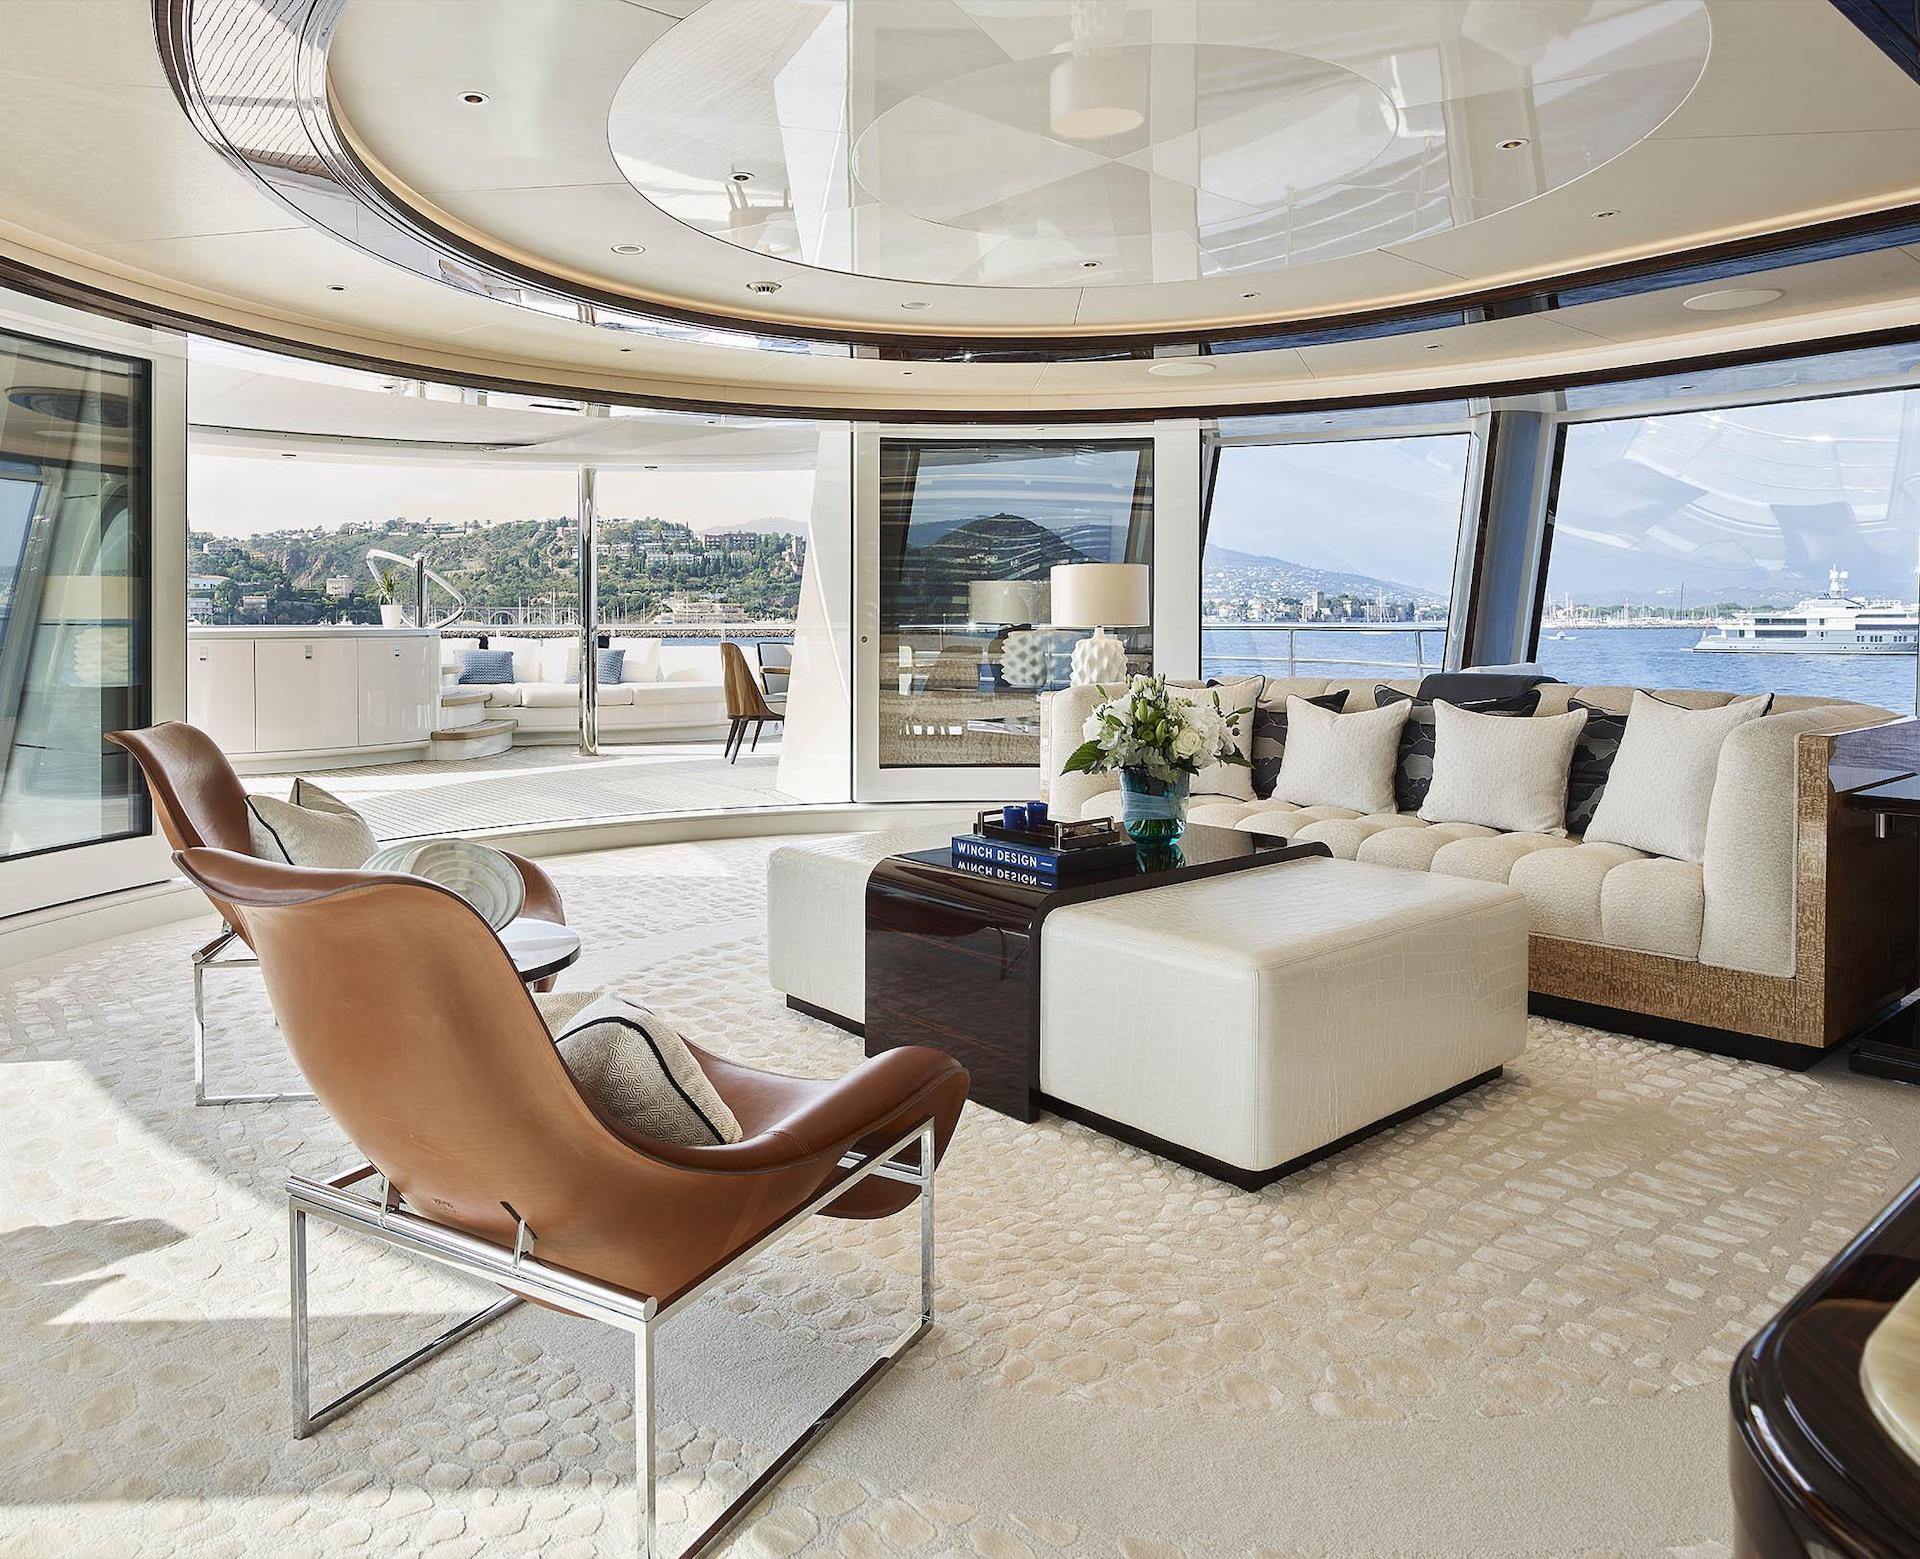 modern yachts owner